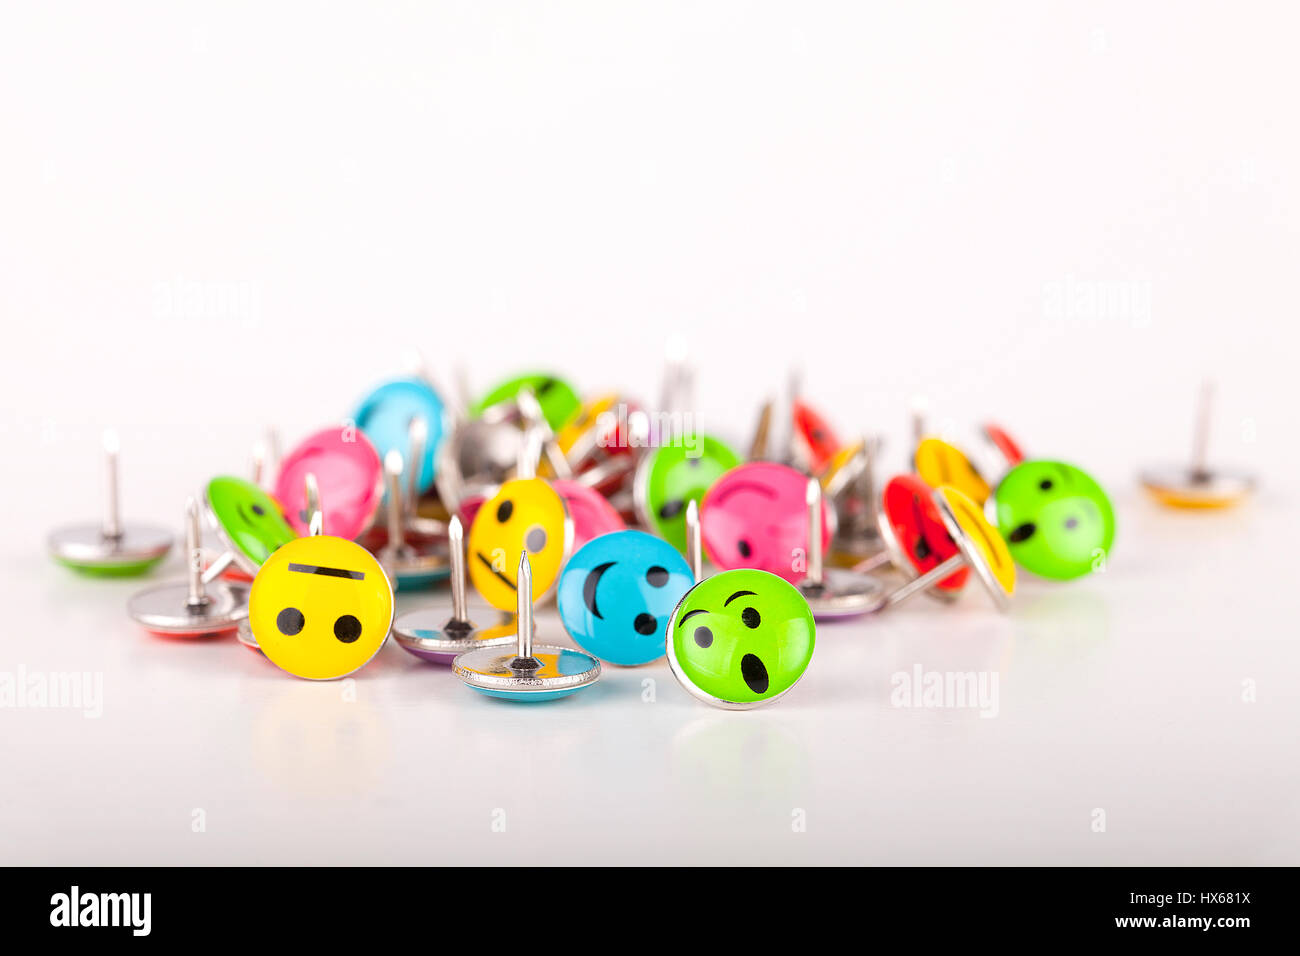 Pile of colorful smiley pushpins on a white surface. Pile of smiley thumbtacks isolated on white background. Stock Photo